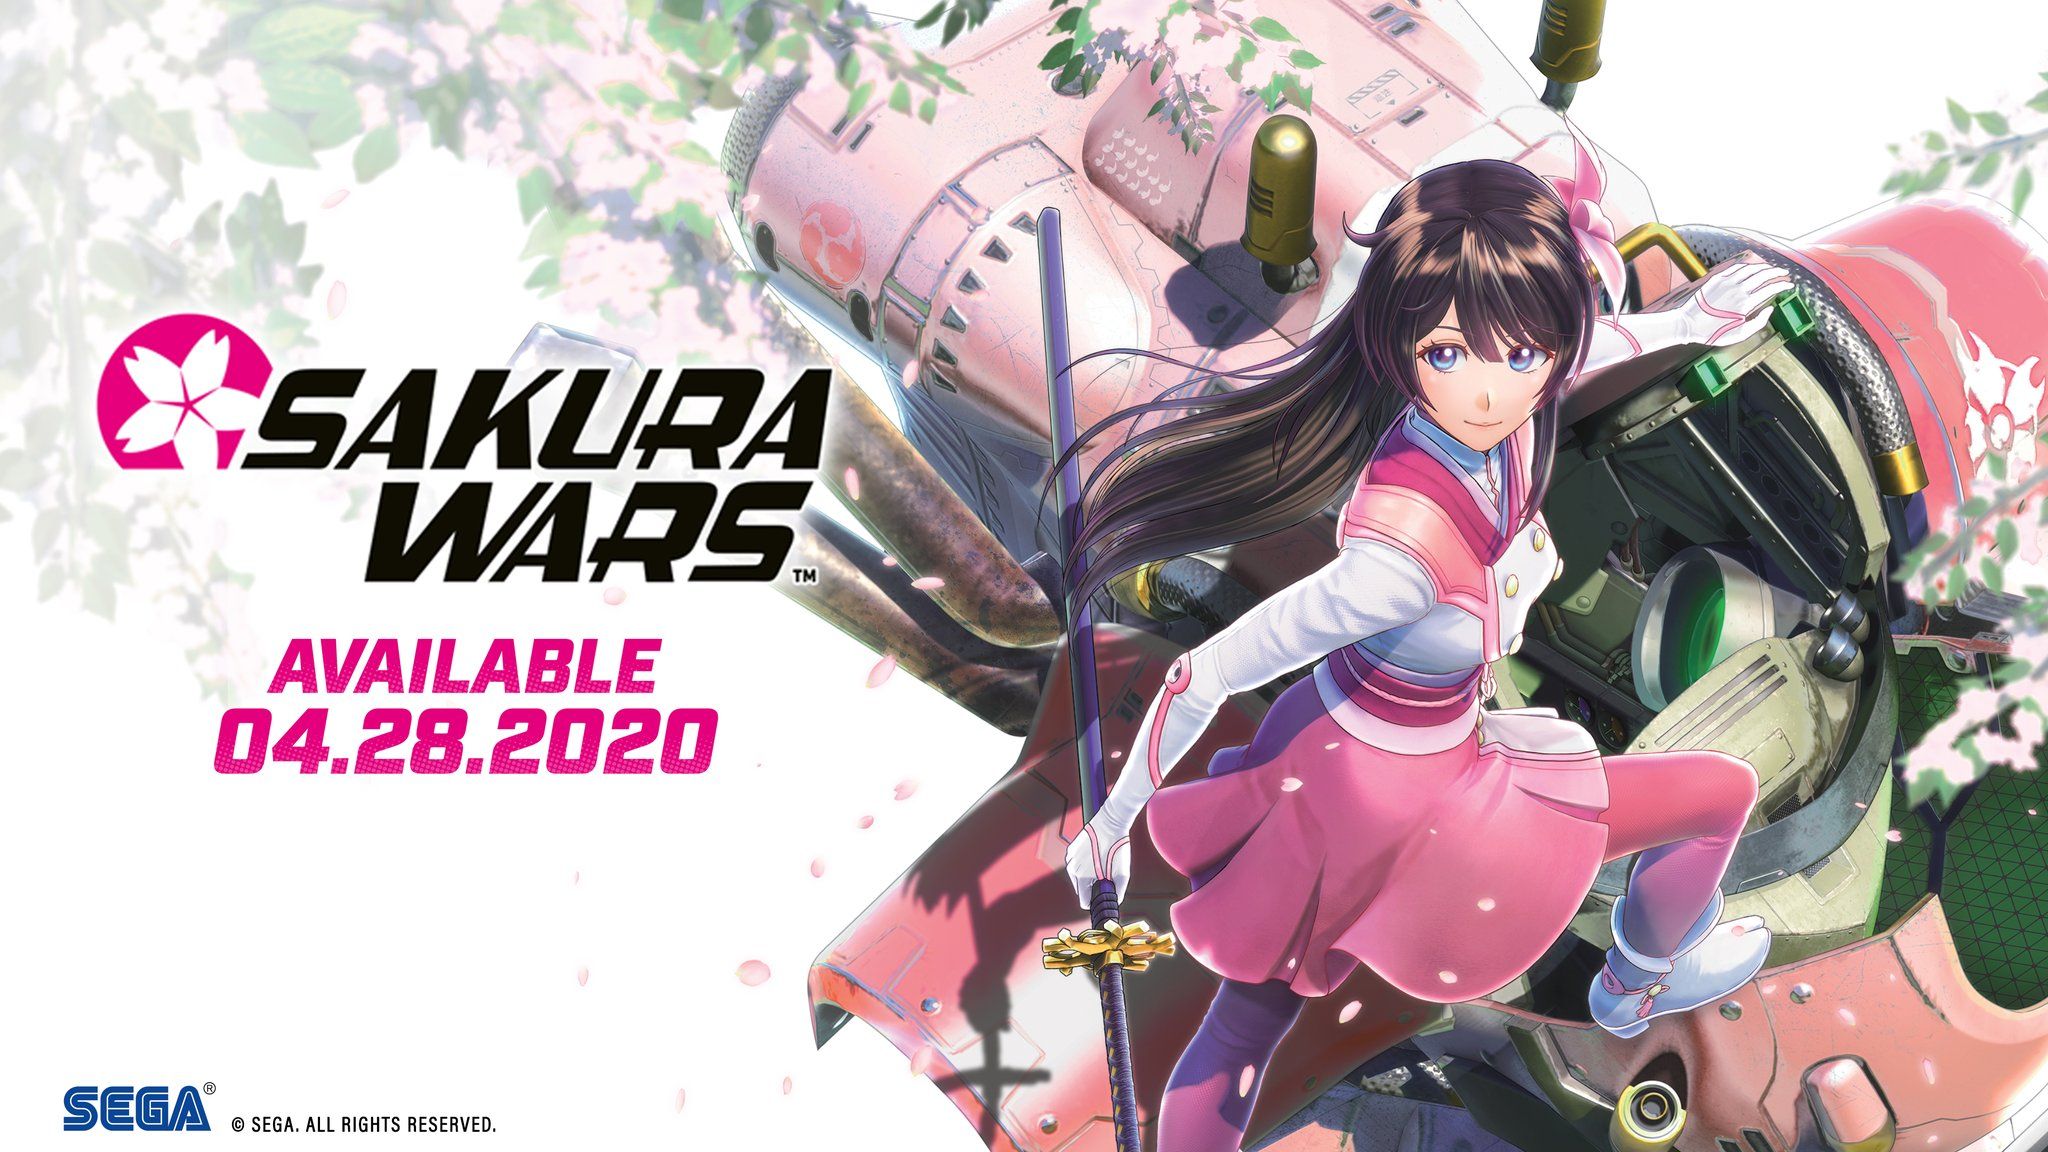 SEGA Wars fans, share your support and spread the word with our social assets! Contains YouTube, Facebook, Twitch, & Twitter banners, and a 4K wallpaper: Sakura Wars launches